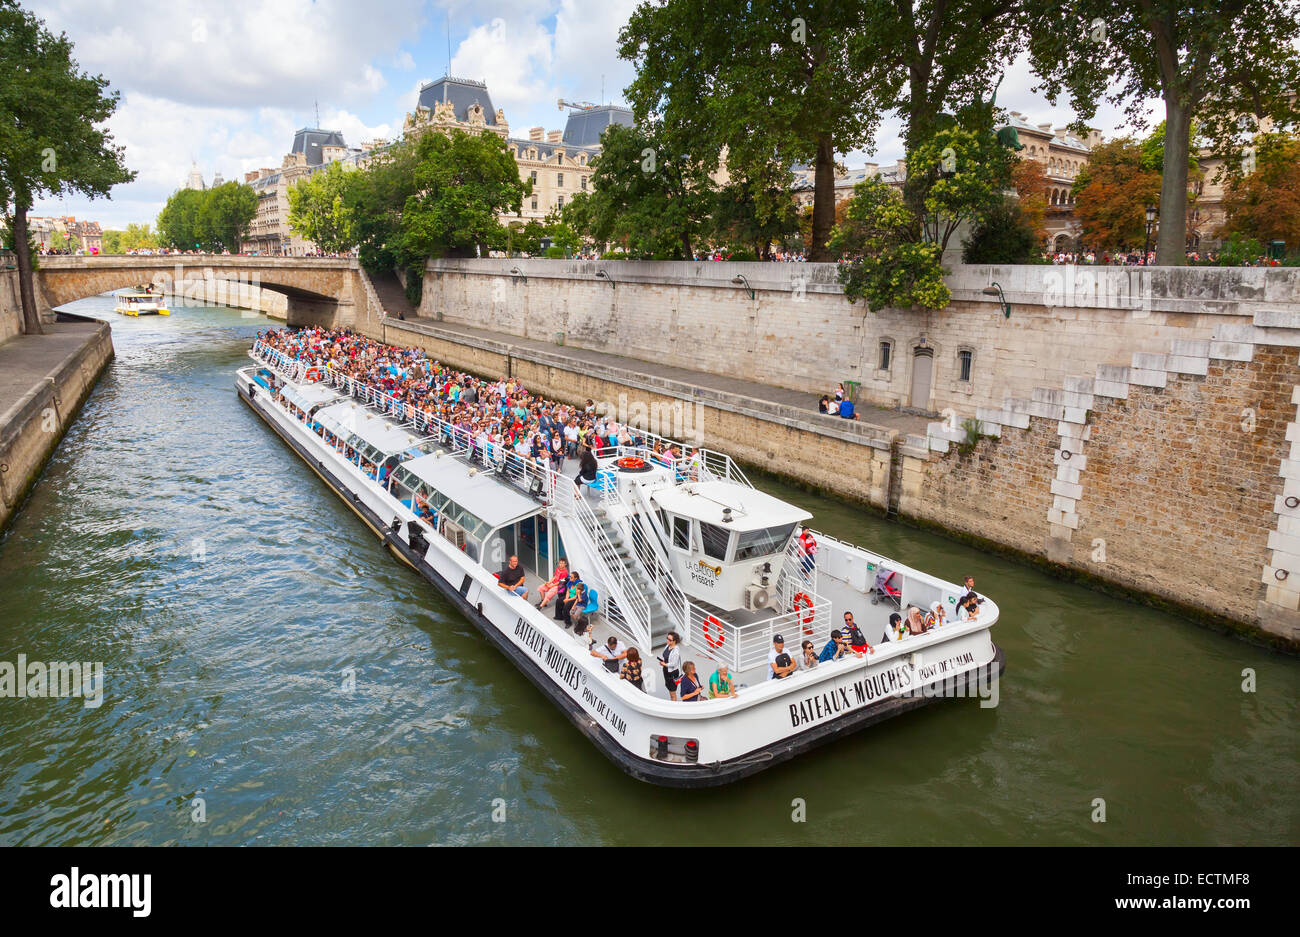 Paris, France - August 11, 2014: White passenger touristic ship operated by Bateaux-Mouches goes on Seine river near Site island Stock Photo